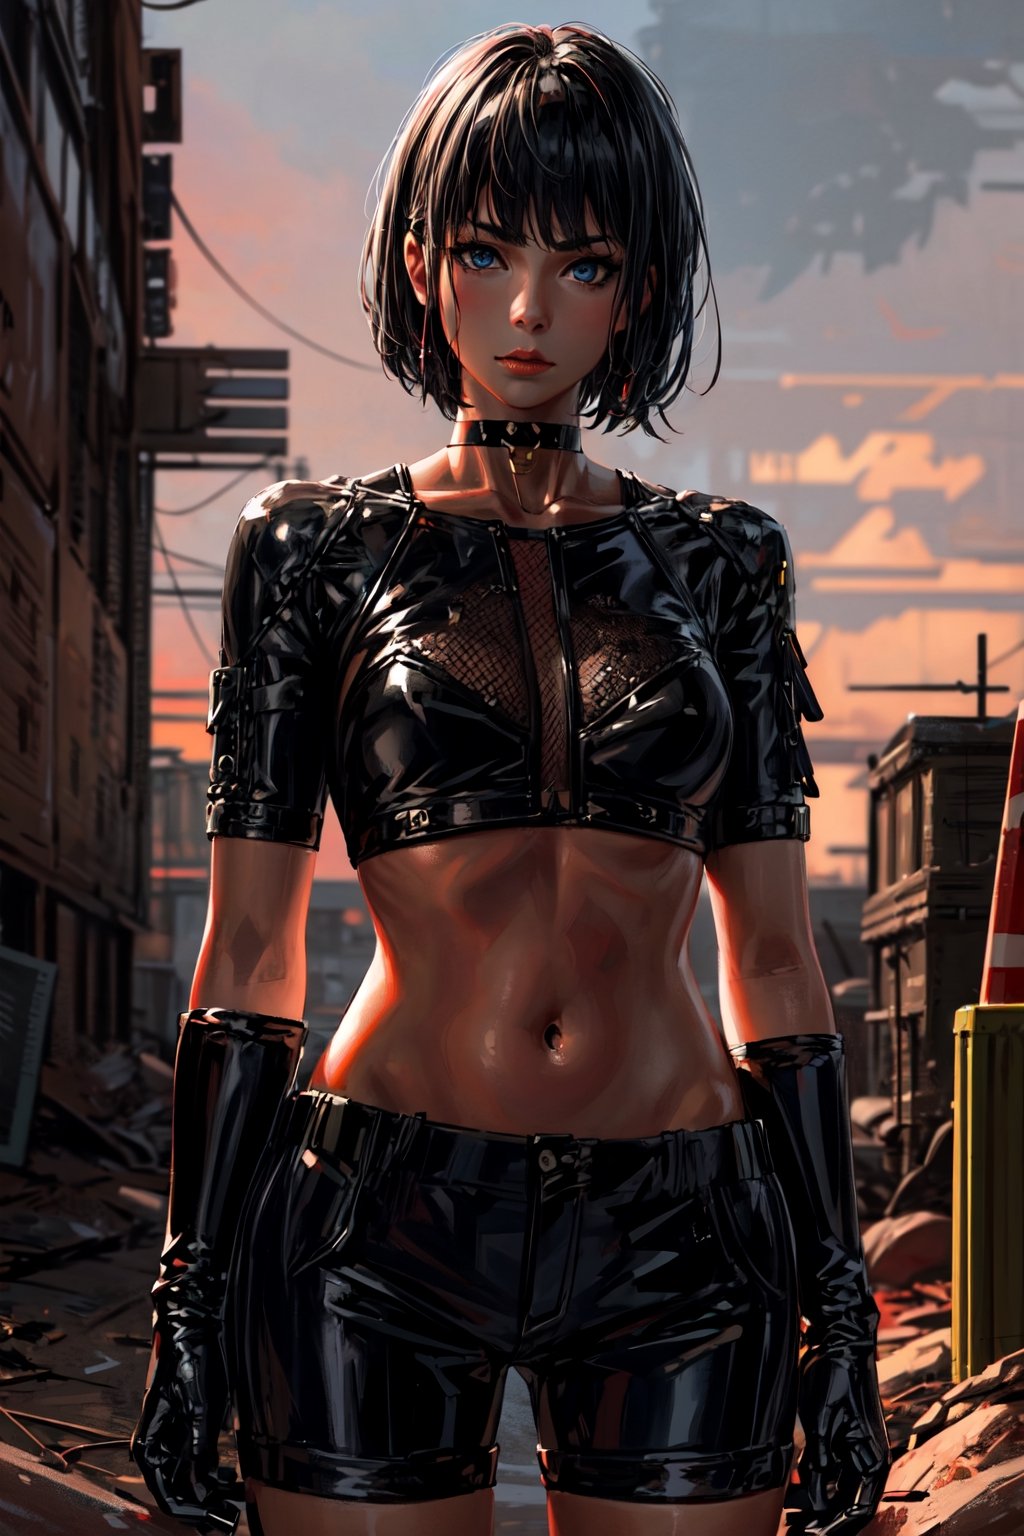 high_resolution,
female_human,
(black_hair),
(blue_eyes),
short_hair,
random_clothing,
tactical clothing,
tactical armor,
pale_skin,
fit,
post-apocalyptic,
random_pose,
bare_midriff,
choker,
sunset,
Science Fiction,